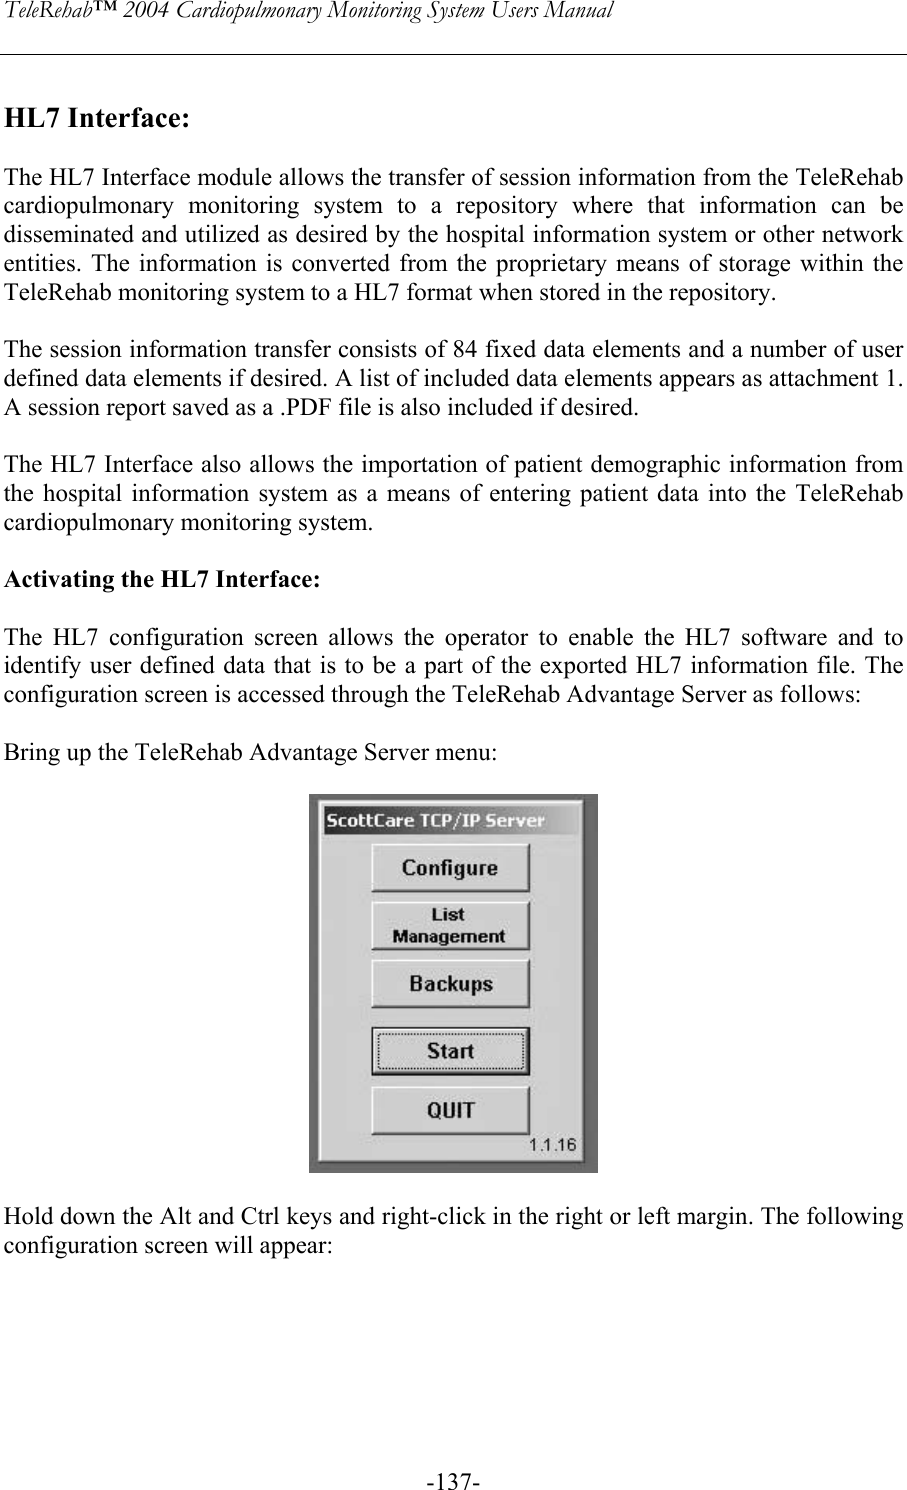 TeleRehab™ 2004 Cardiopulmonary Monitoring System Users Manual    -137- HL7 Interface:  The HL7 Interface module allows the transfer of session information from the TeleRehab cardiopulmonary monitoring system to a repository where that information can be disseminated and utilized as desired by the hospital information system or other network entities. The information is converted from the proprietary means of storage within the TeleRehab monitoring system to a HL7 format when stored in the repository.  The session information transfer consists of 84 fixed data elements and a number of user defined data elements if desired. A list of included data elements appears as attachment 1. A session report saved as a .PDF file is also included if desired.   The HL7 Interface also allows the importation of patient demographic information from the hospital information system as a means of entering patient data into the TeleRehab cardiopulmonary monitoring system.  Activating the HL7 Interface:  The HL7 configuration screen allows the operator to enable the HL7 software and to identify user defined data that is to be a part of the exported HL7 information file. The configuration screen is accessed through the TeleRehab Advantage Server as follows:  Bring up the TeleRehab Advantage Server menu:    Hold down the Alt and Ctrl keys and right-click in the right or left margin. The following configuration screen will appear:    